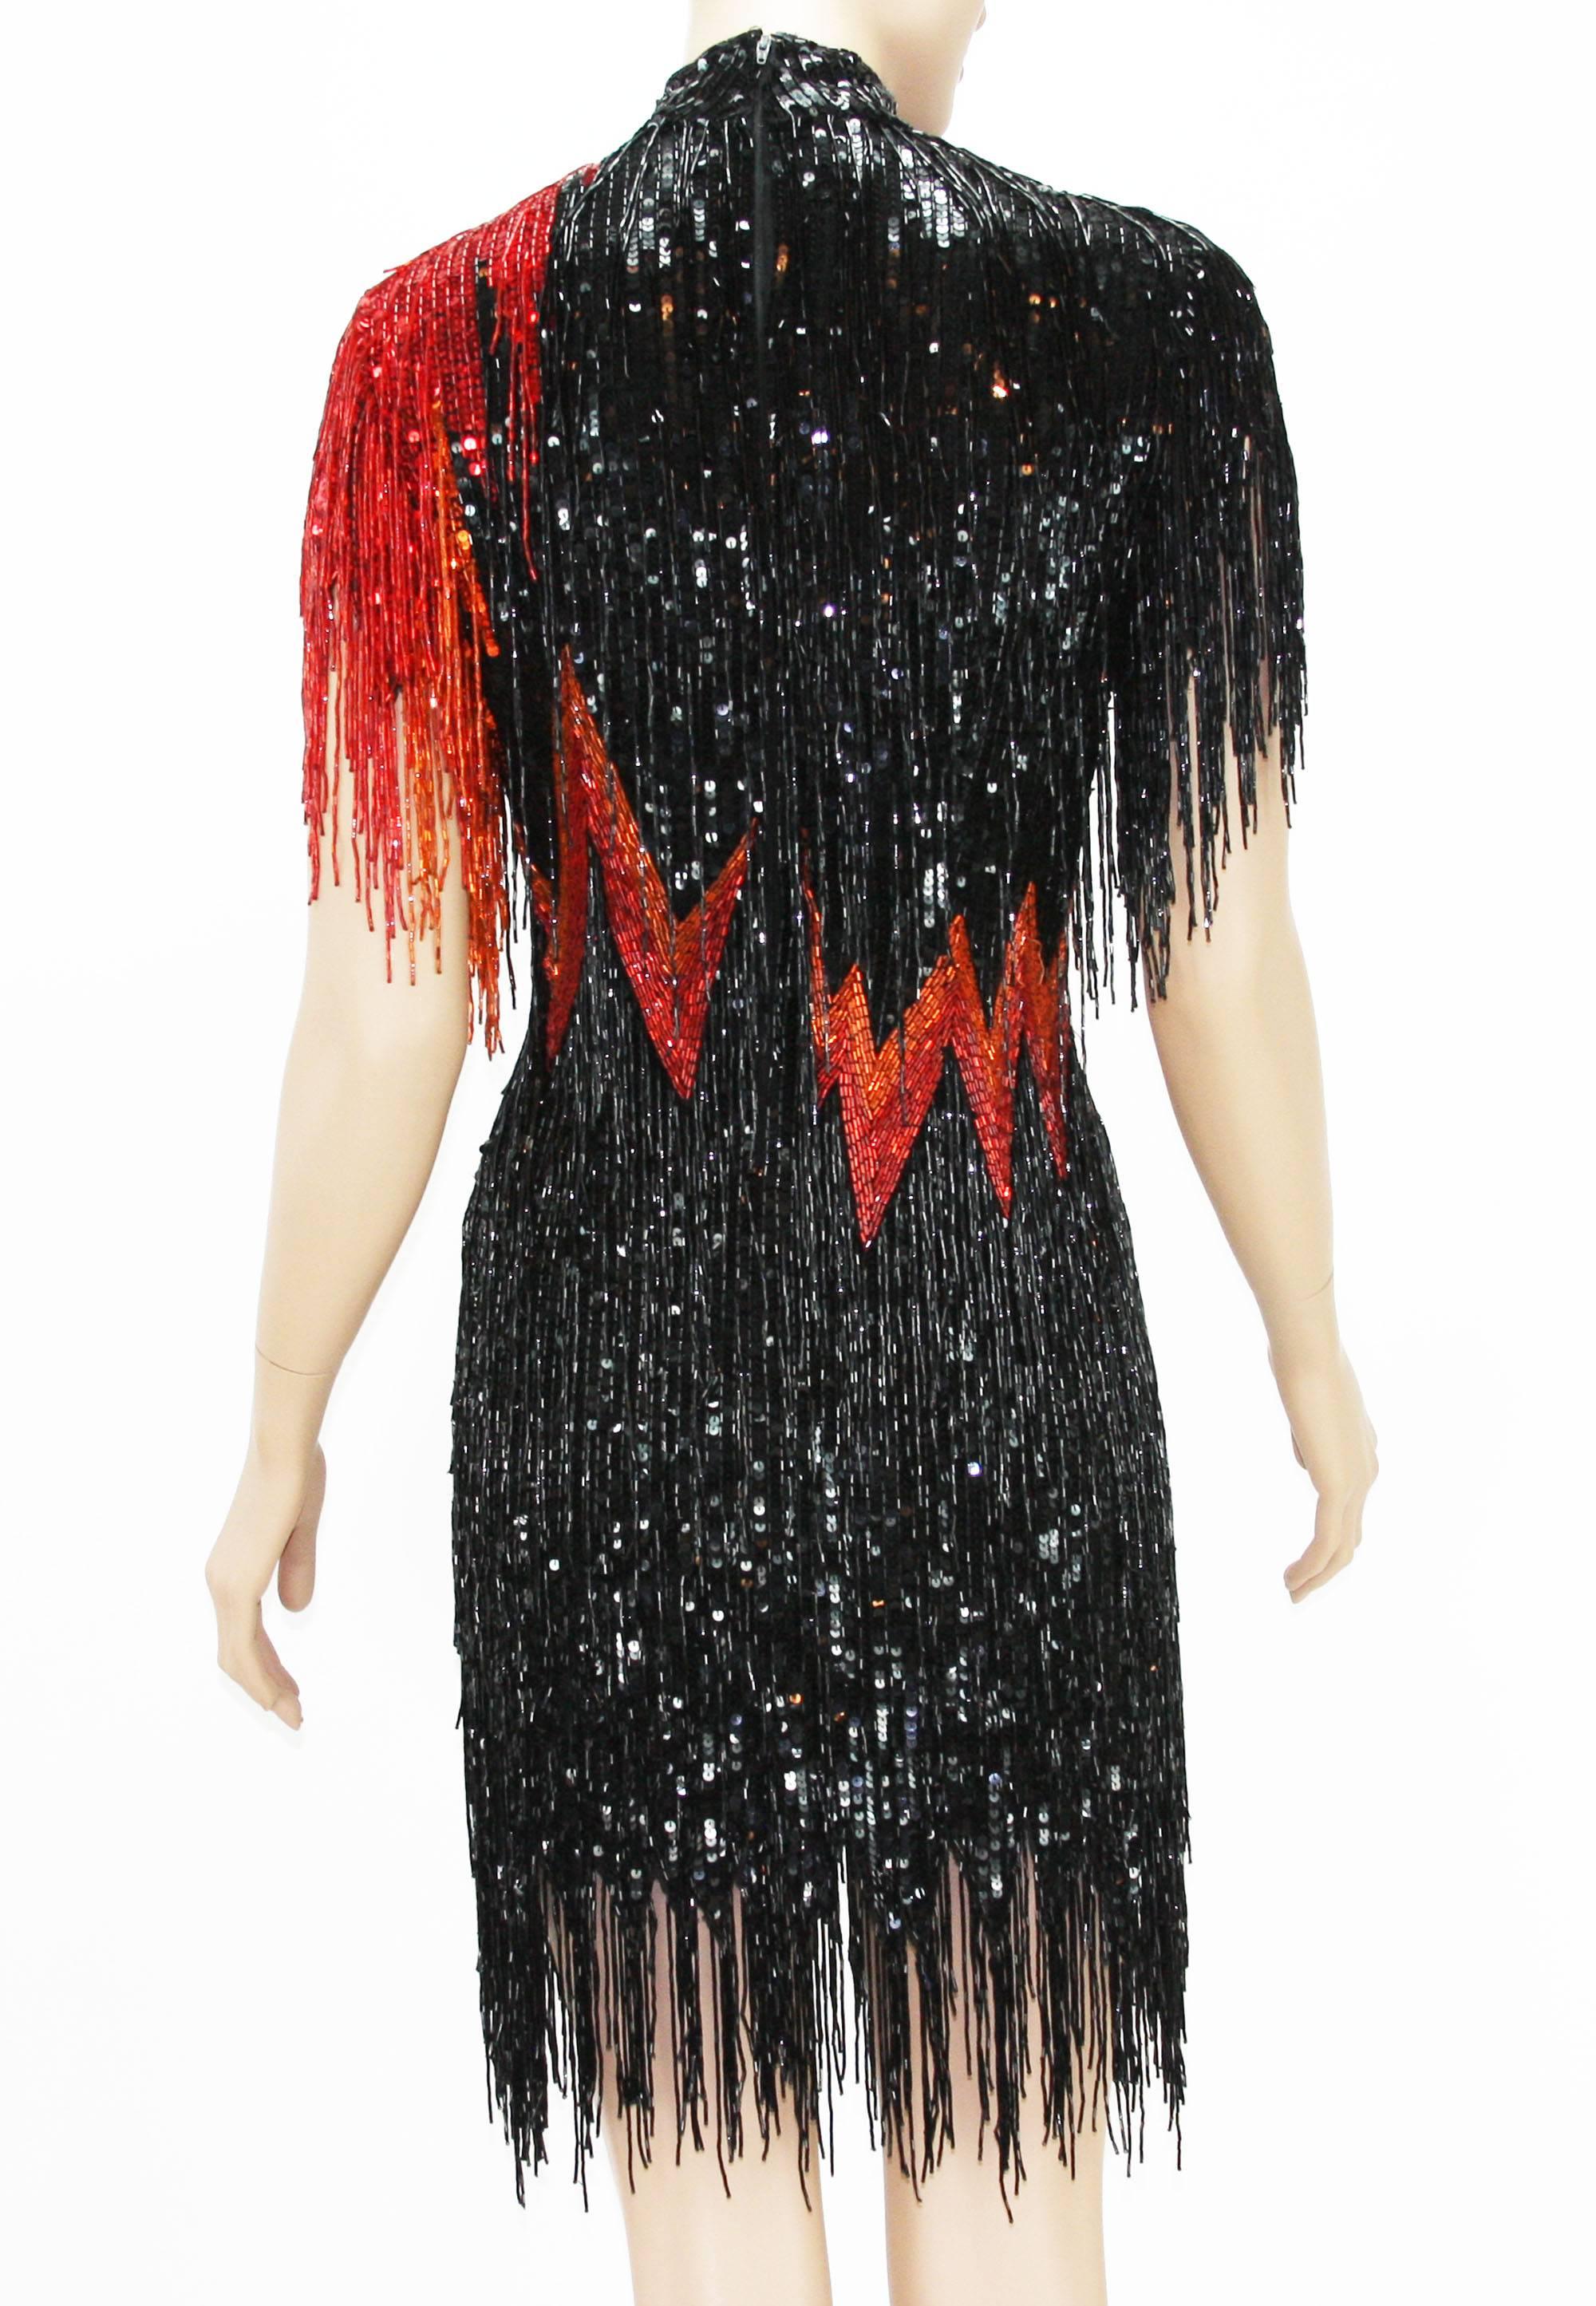 Women's Bob Mackie Fully Beaded Dress with Gloves from European Dance Competition, 1980s